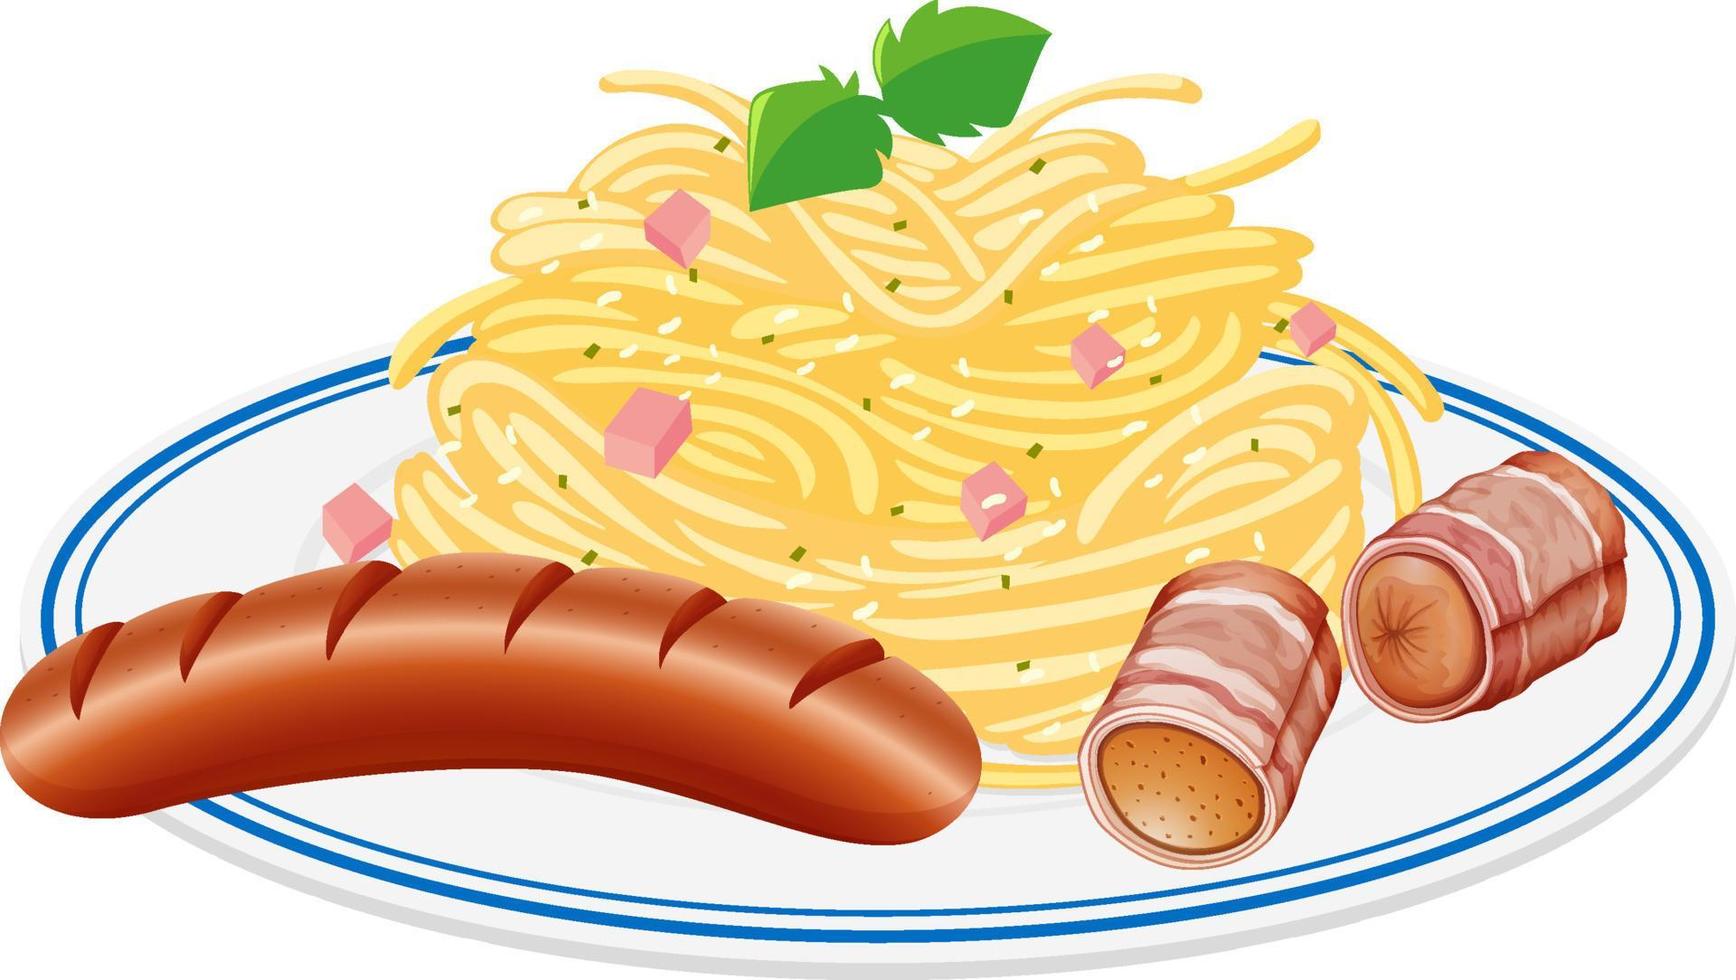 Spaghetti and sausage in a plate vector